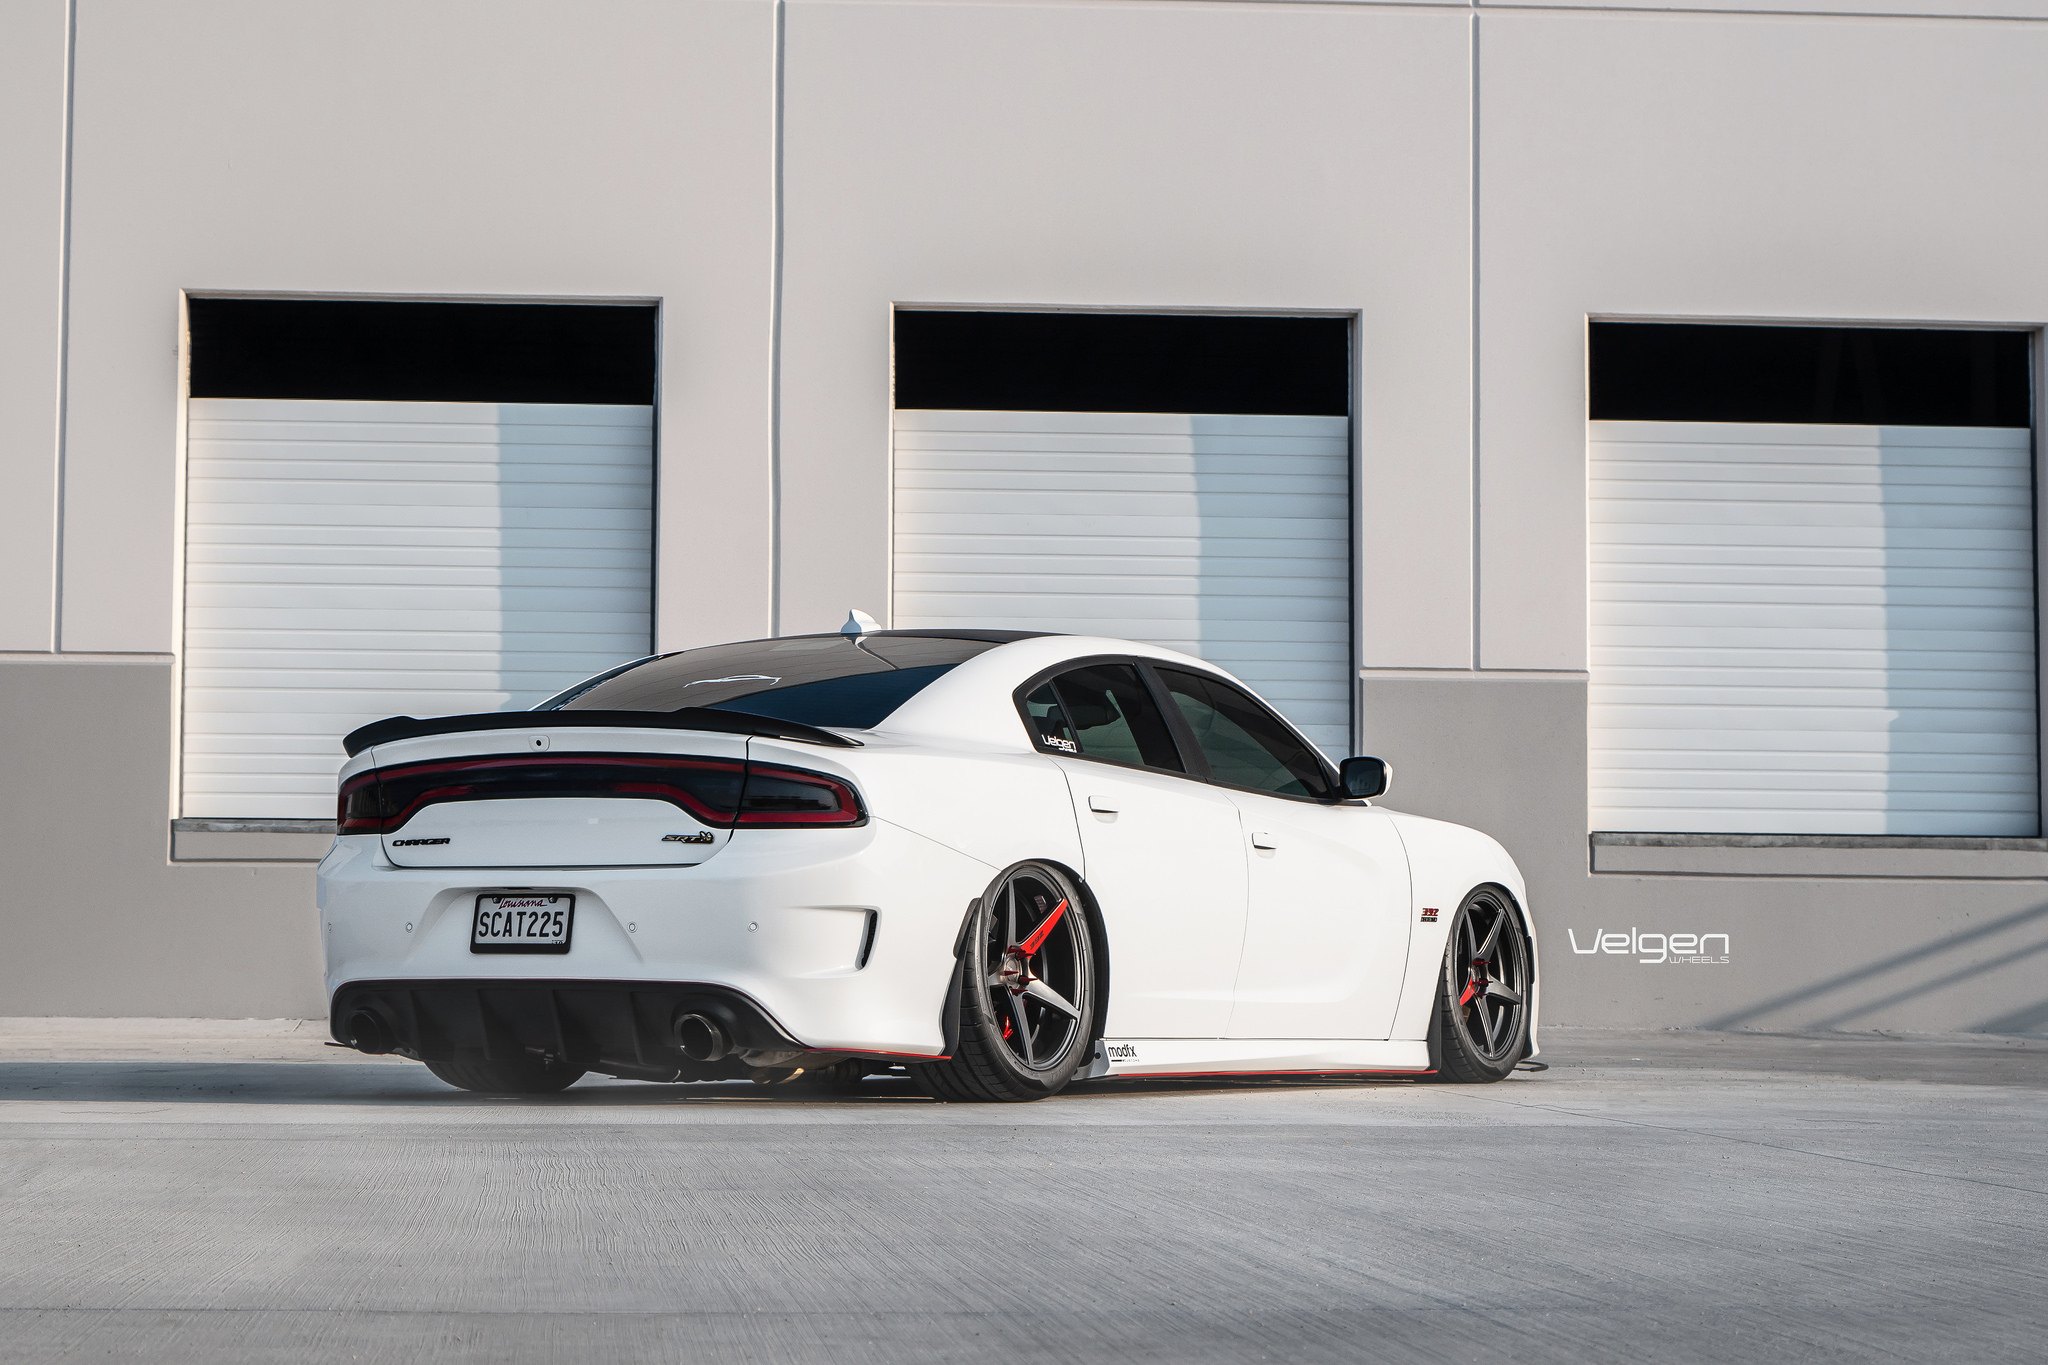 Aftermarket Rear Diffuser on White Dodge Charger - Photo by Velgen